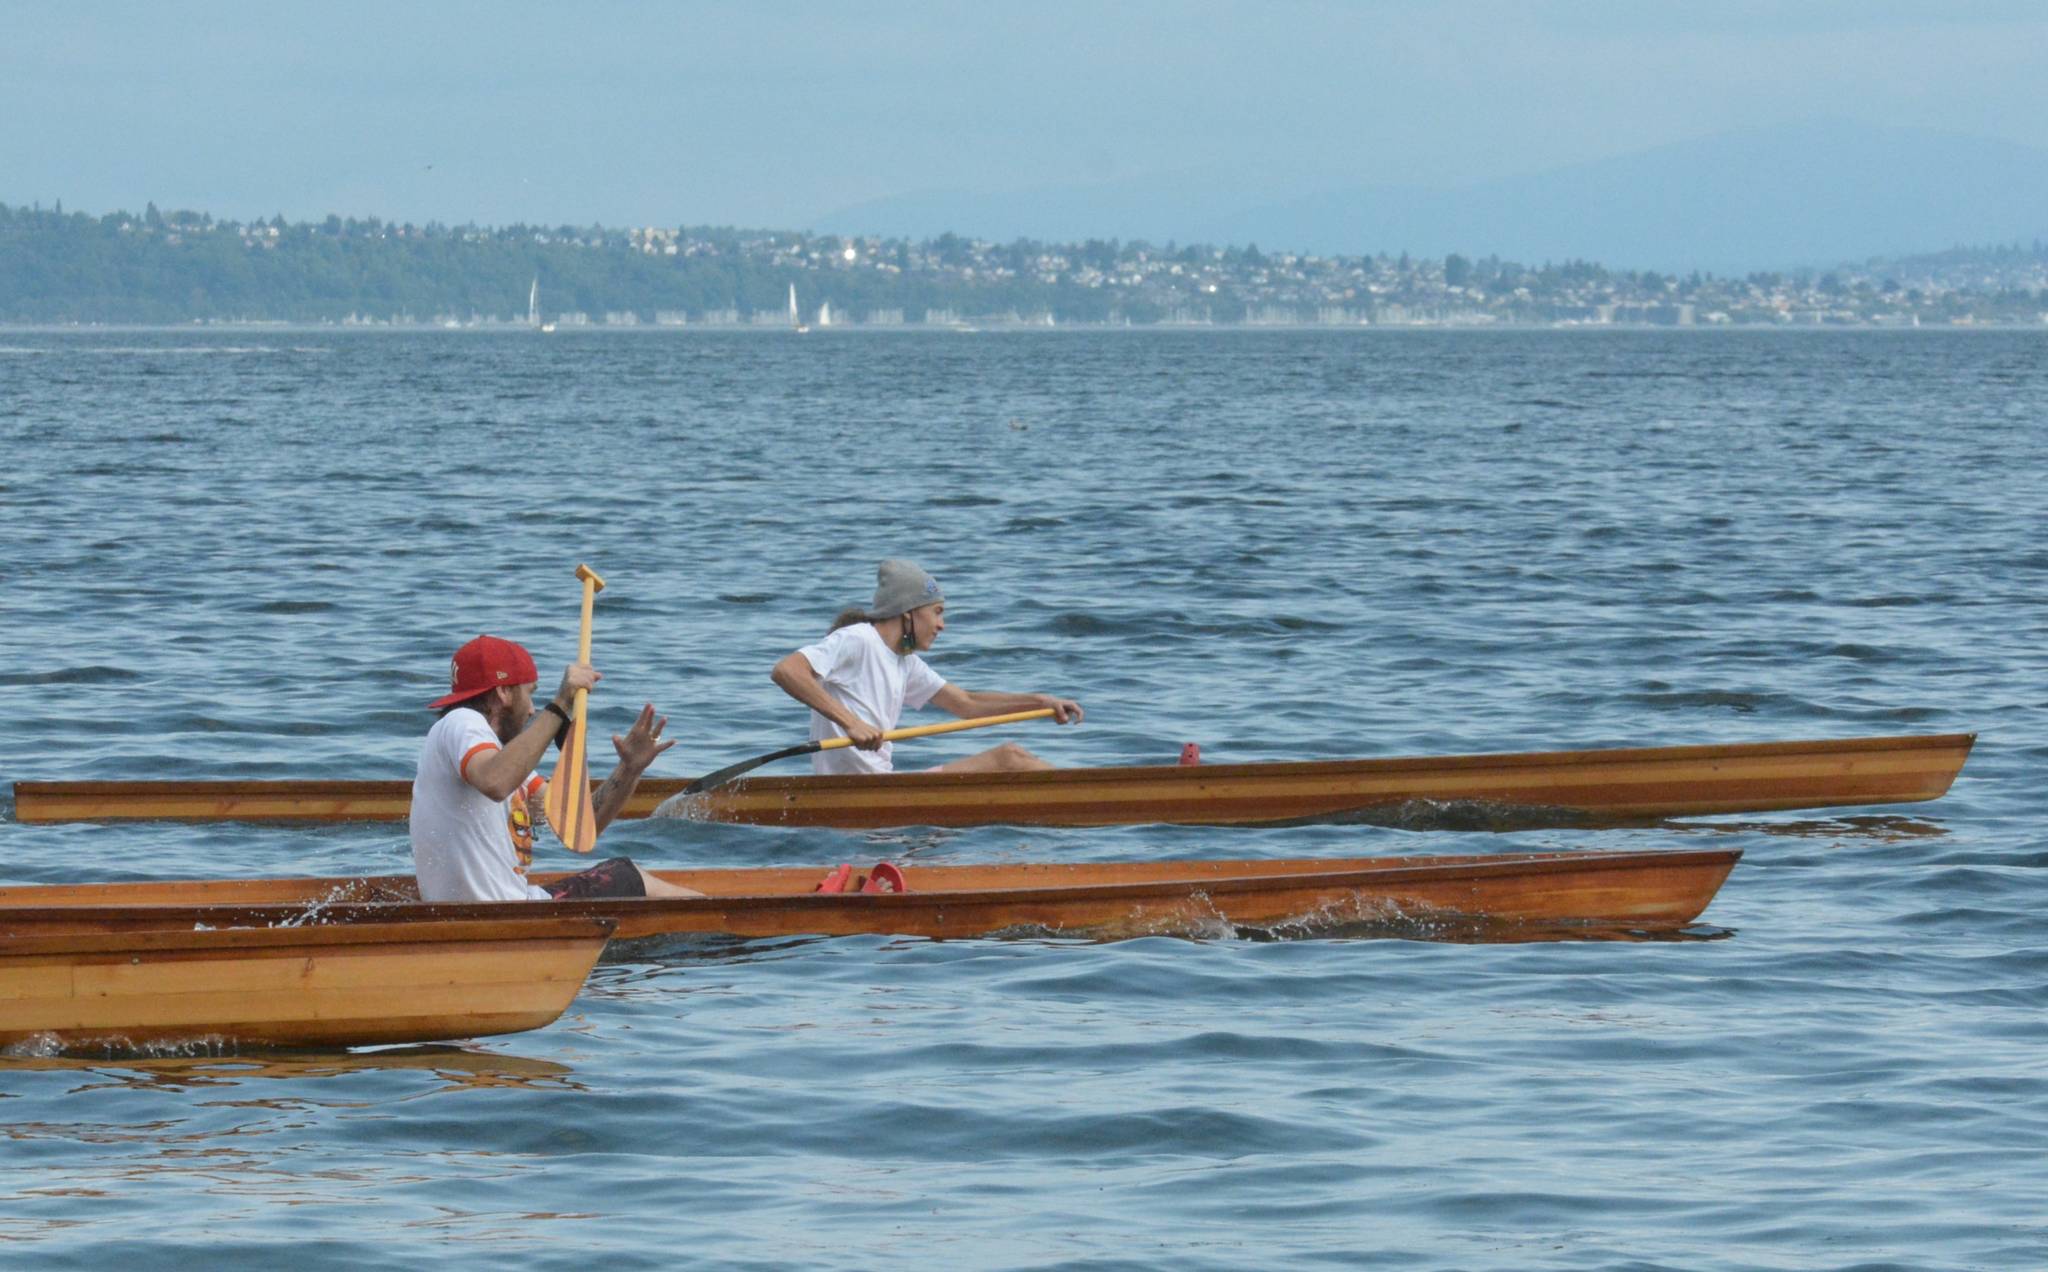 Suquamish competitors participate in “war canoe” races just off the shore from the Suquamish Tribe’s House of Awakened Culture in downtown Suquamish on Saturday. (Photo by Jon Anderson/Courtesy of Suquamish Tribe)